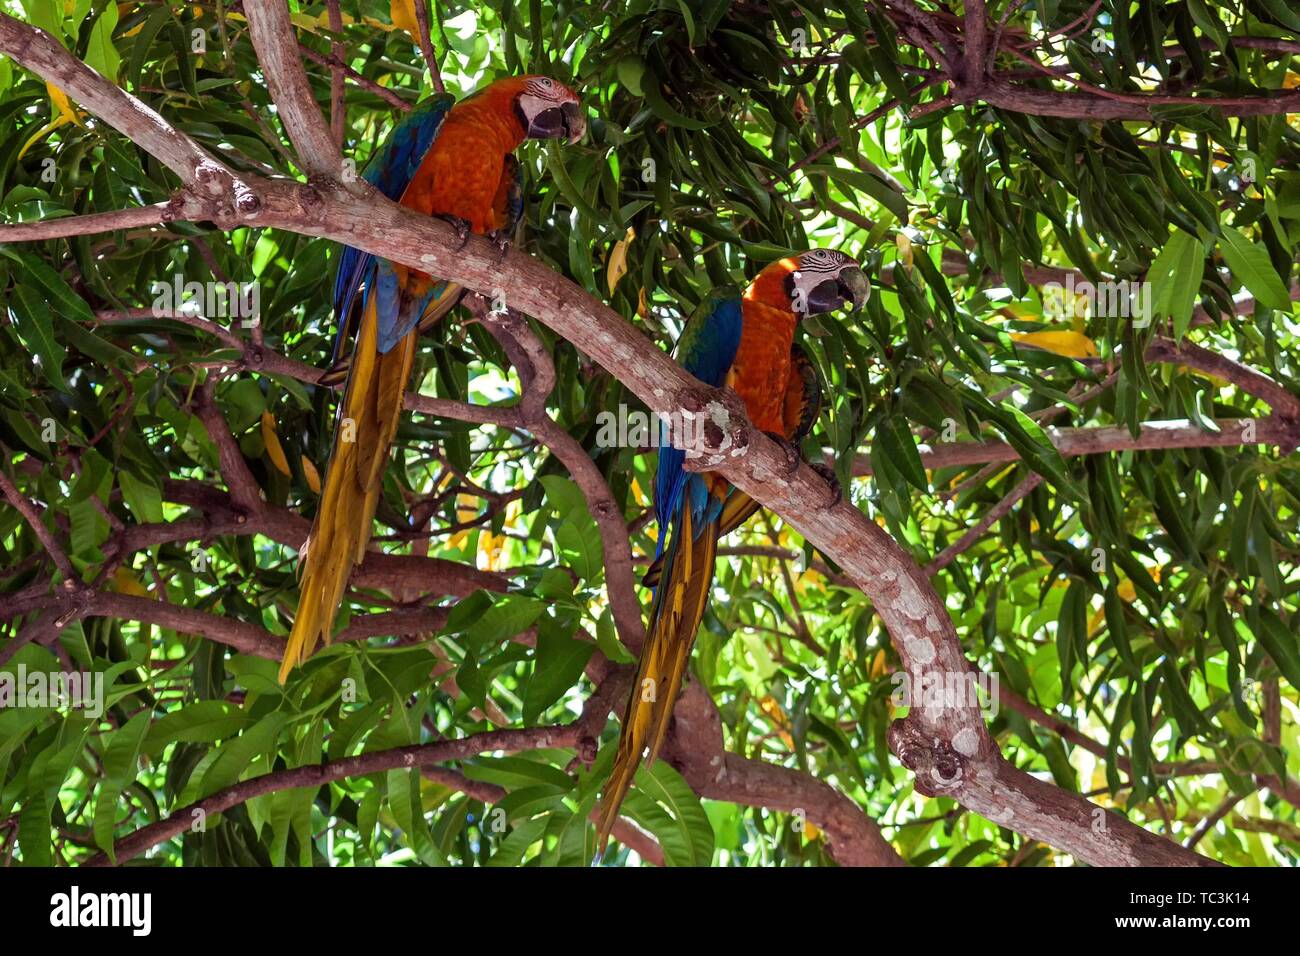 Two Scarlet macaws (Ara macao), animal pair sitting on a branch in a tree, Guanacaste province, Costa Rica Stock Photo